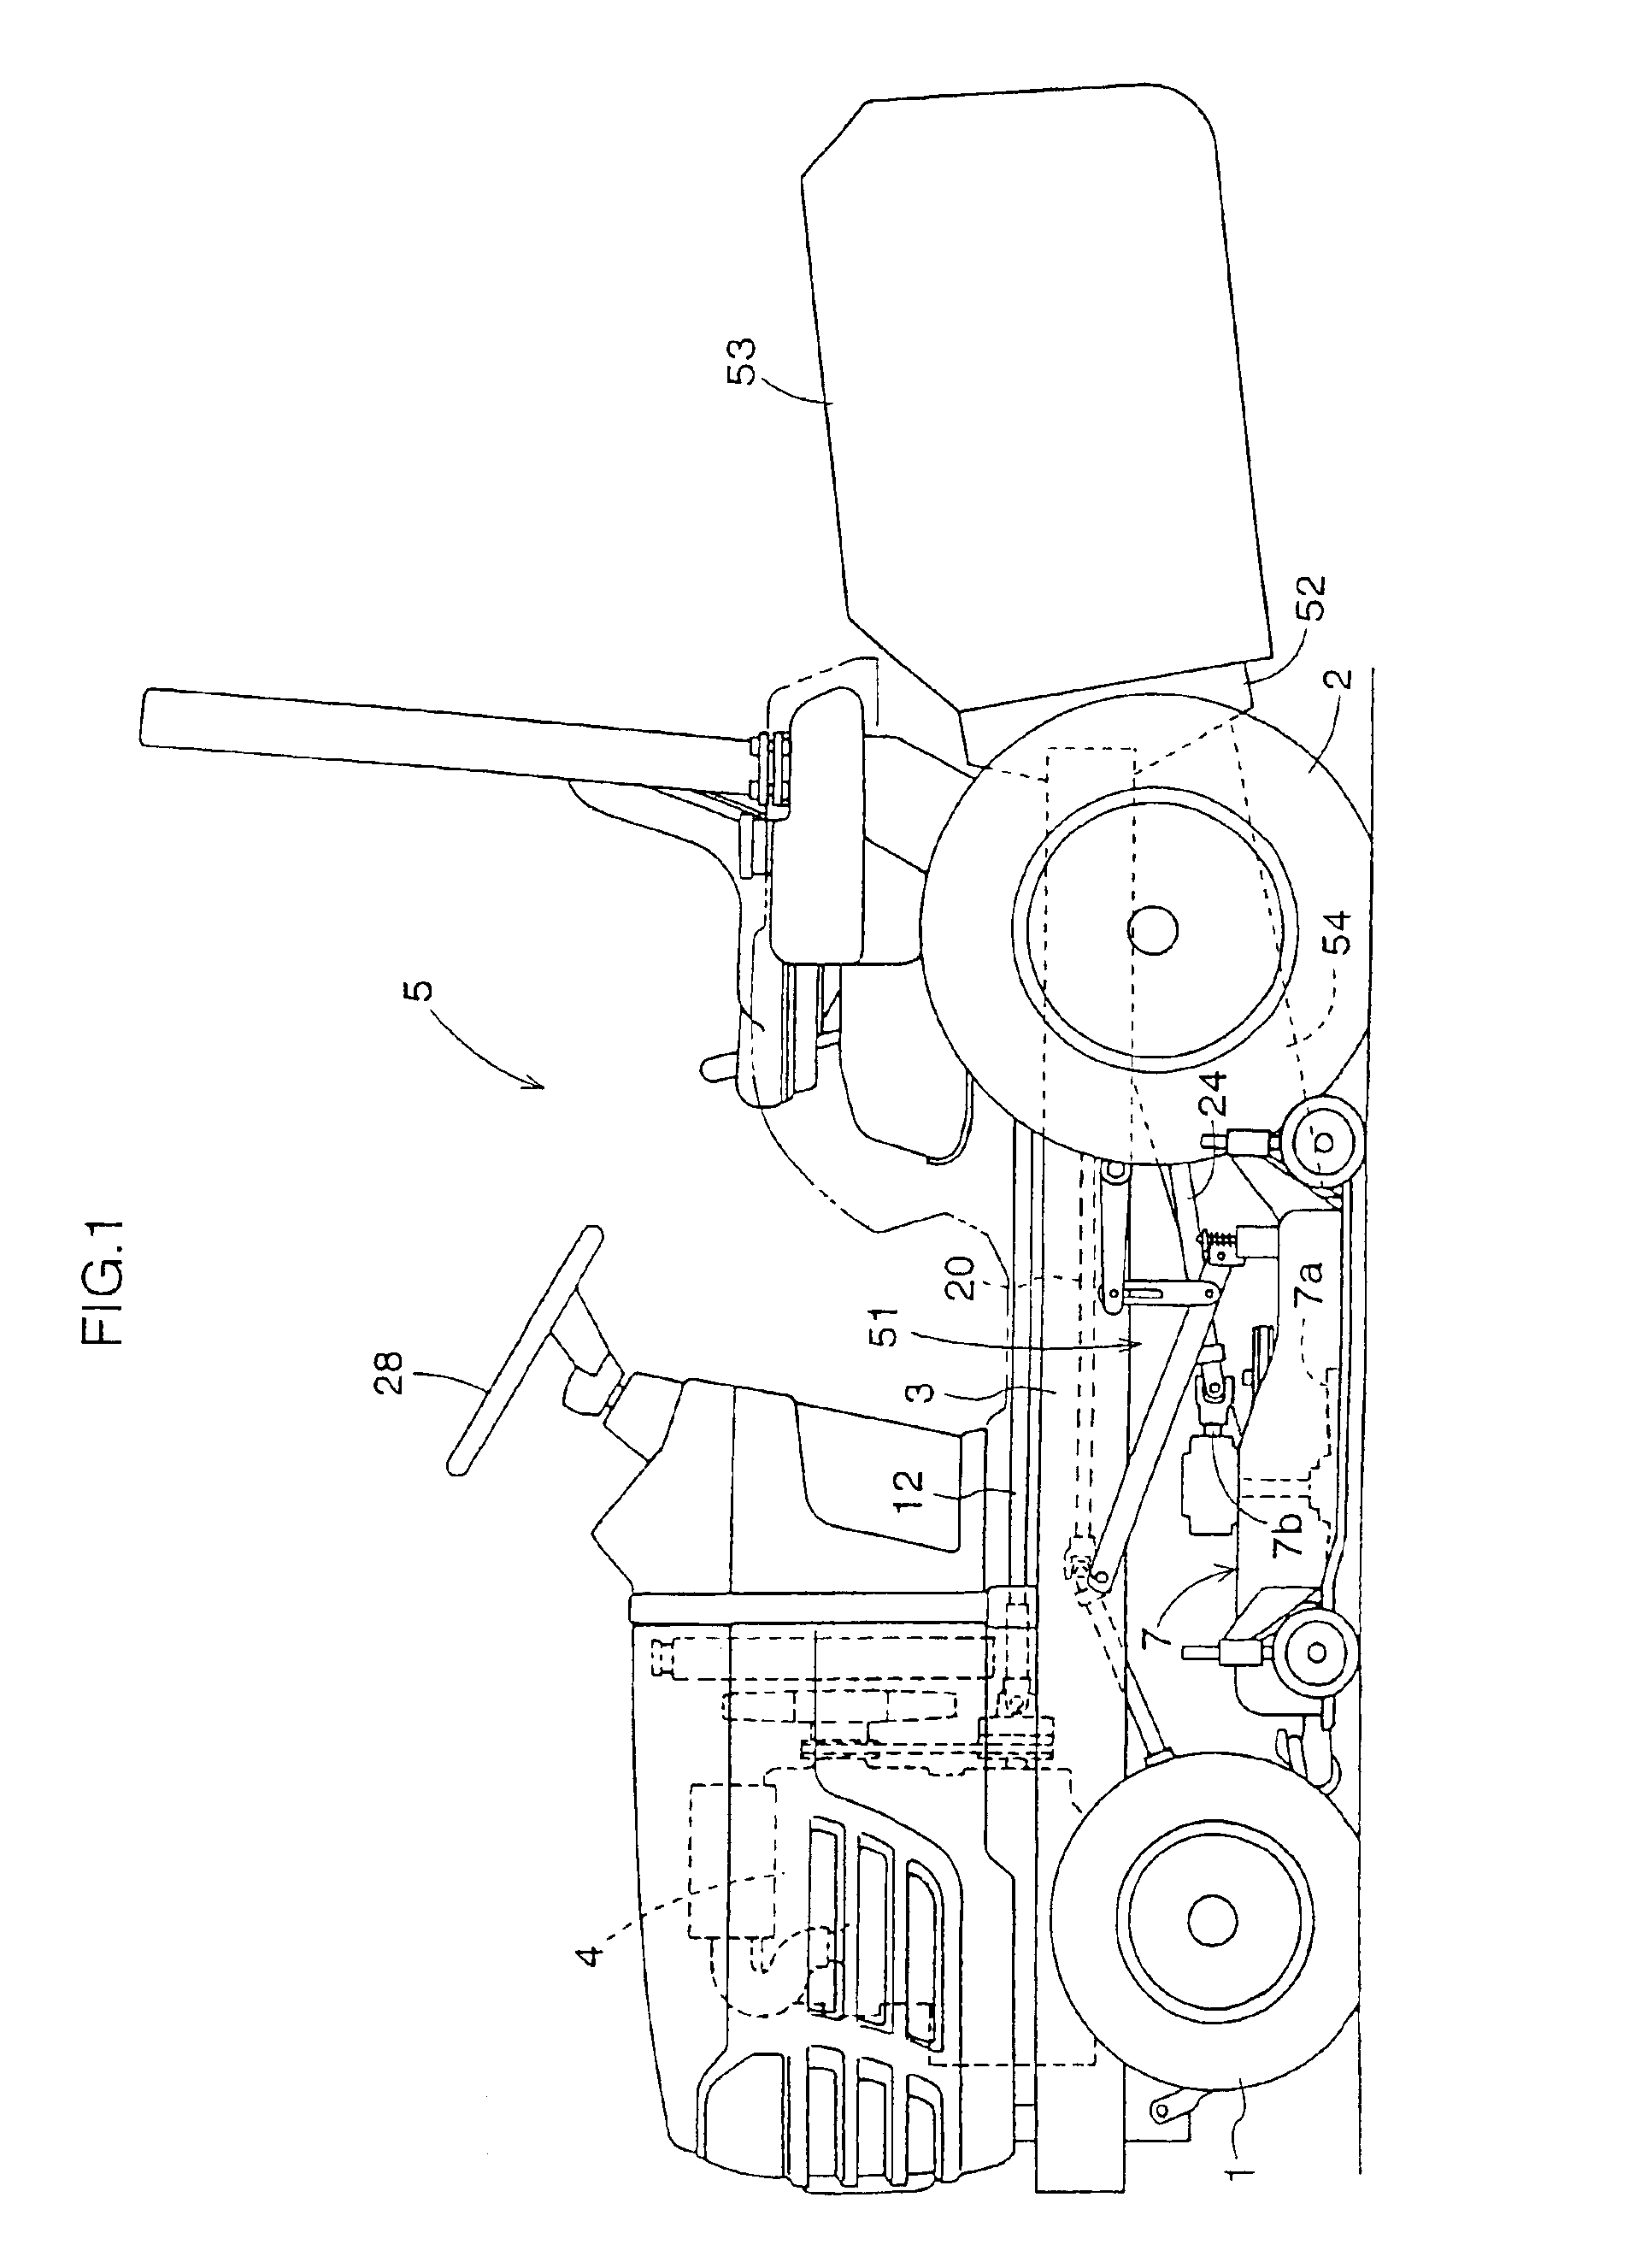 Lawn mower having selectively drivable wheels